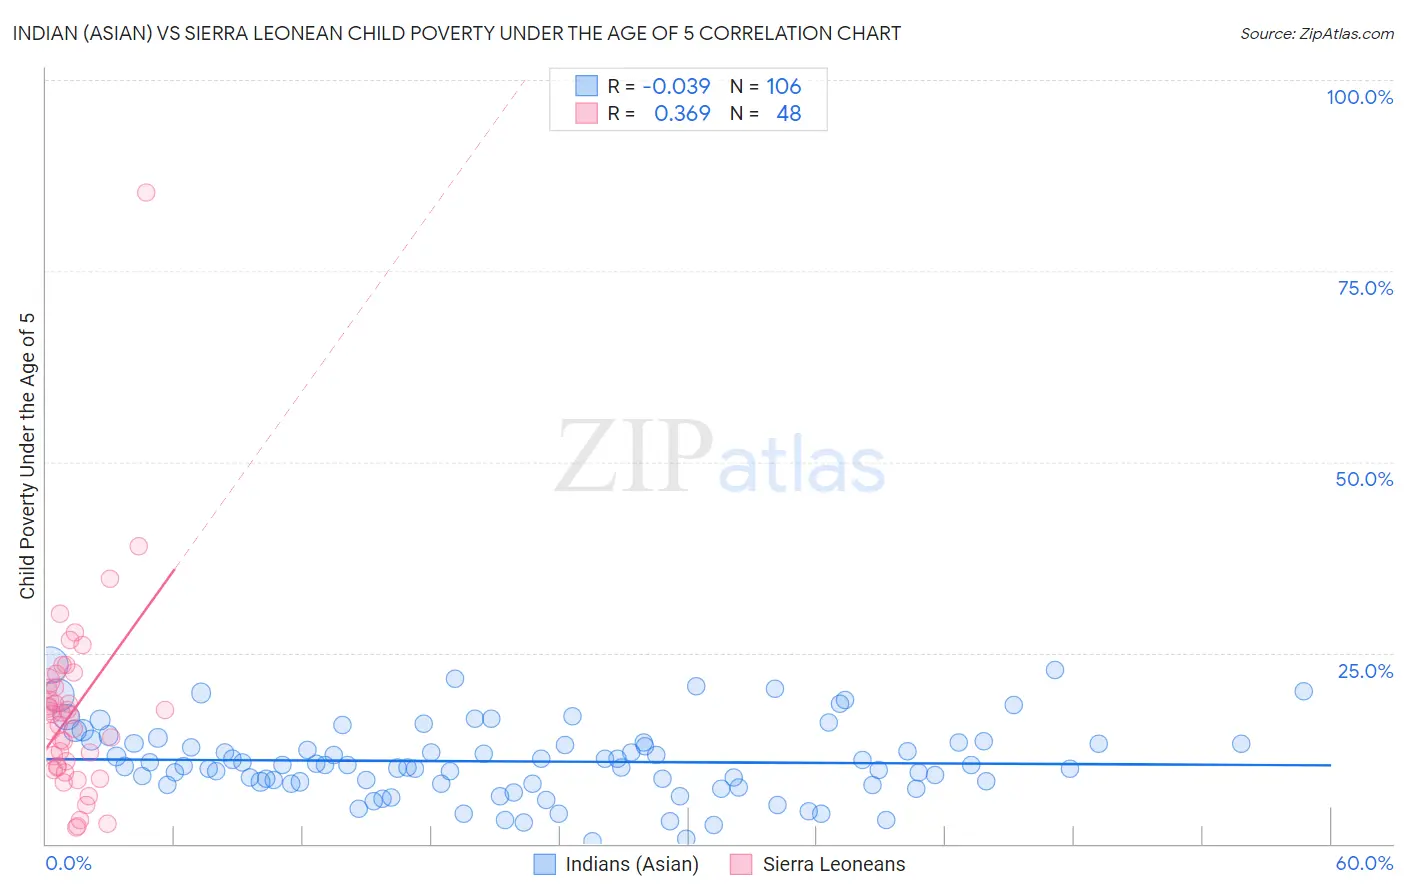 Indian (Asian) vs Sierra Leonean Child Poverty Under the Age of 5